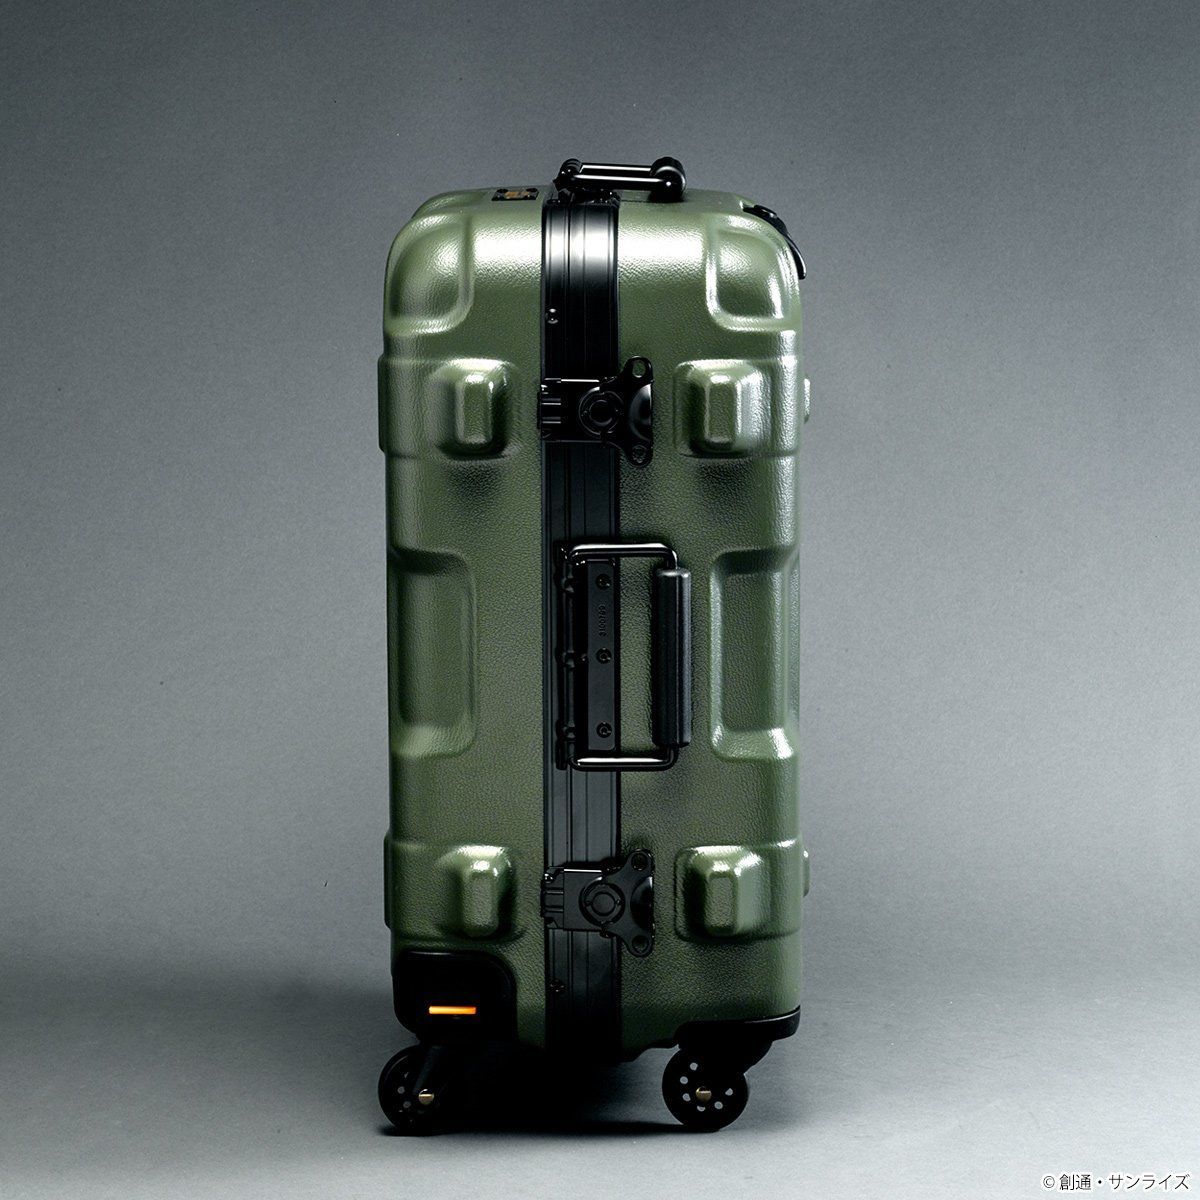 STRICT-G×PROTEX Luggage CR-3300 Mobile Suit Gundam Zeon